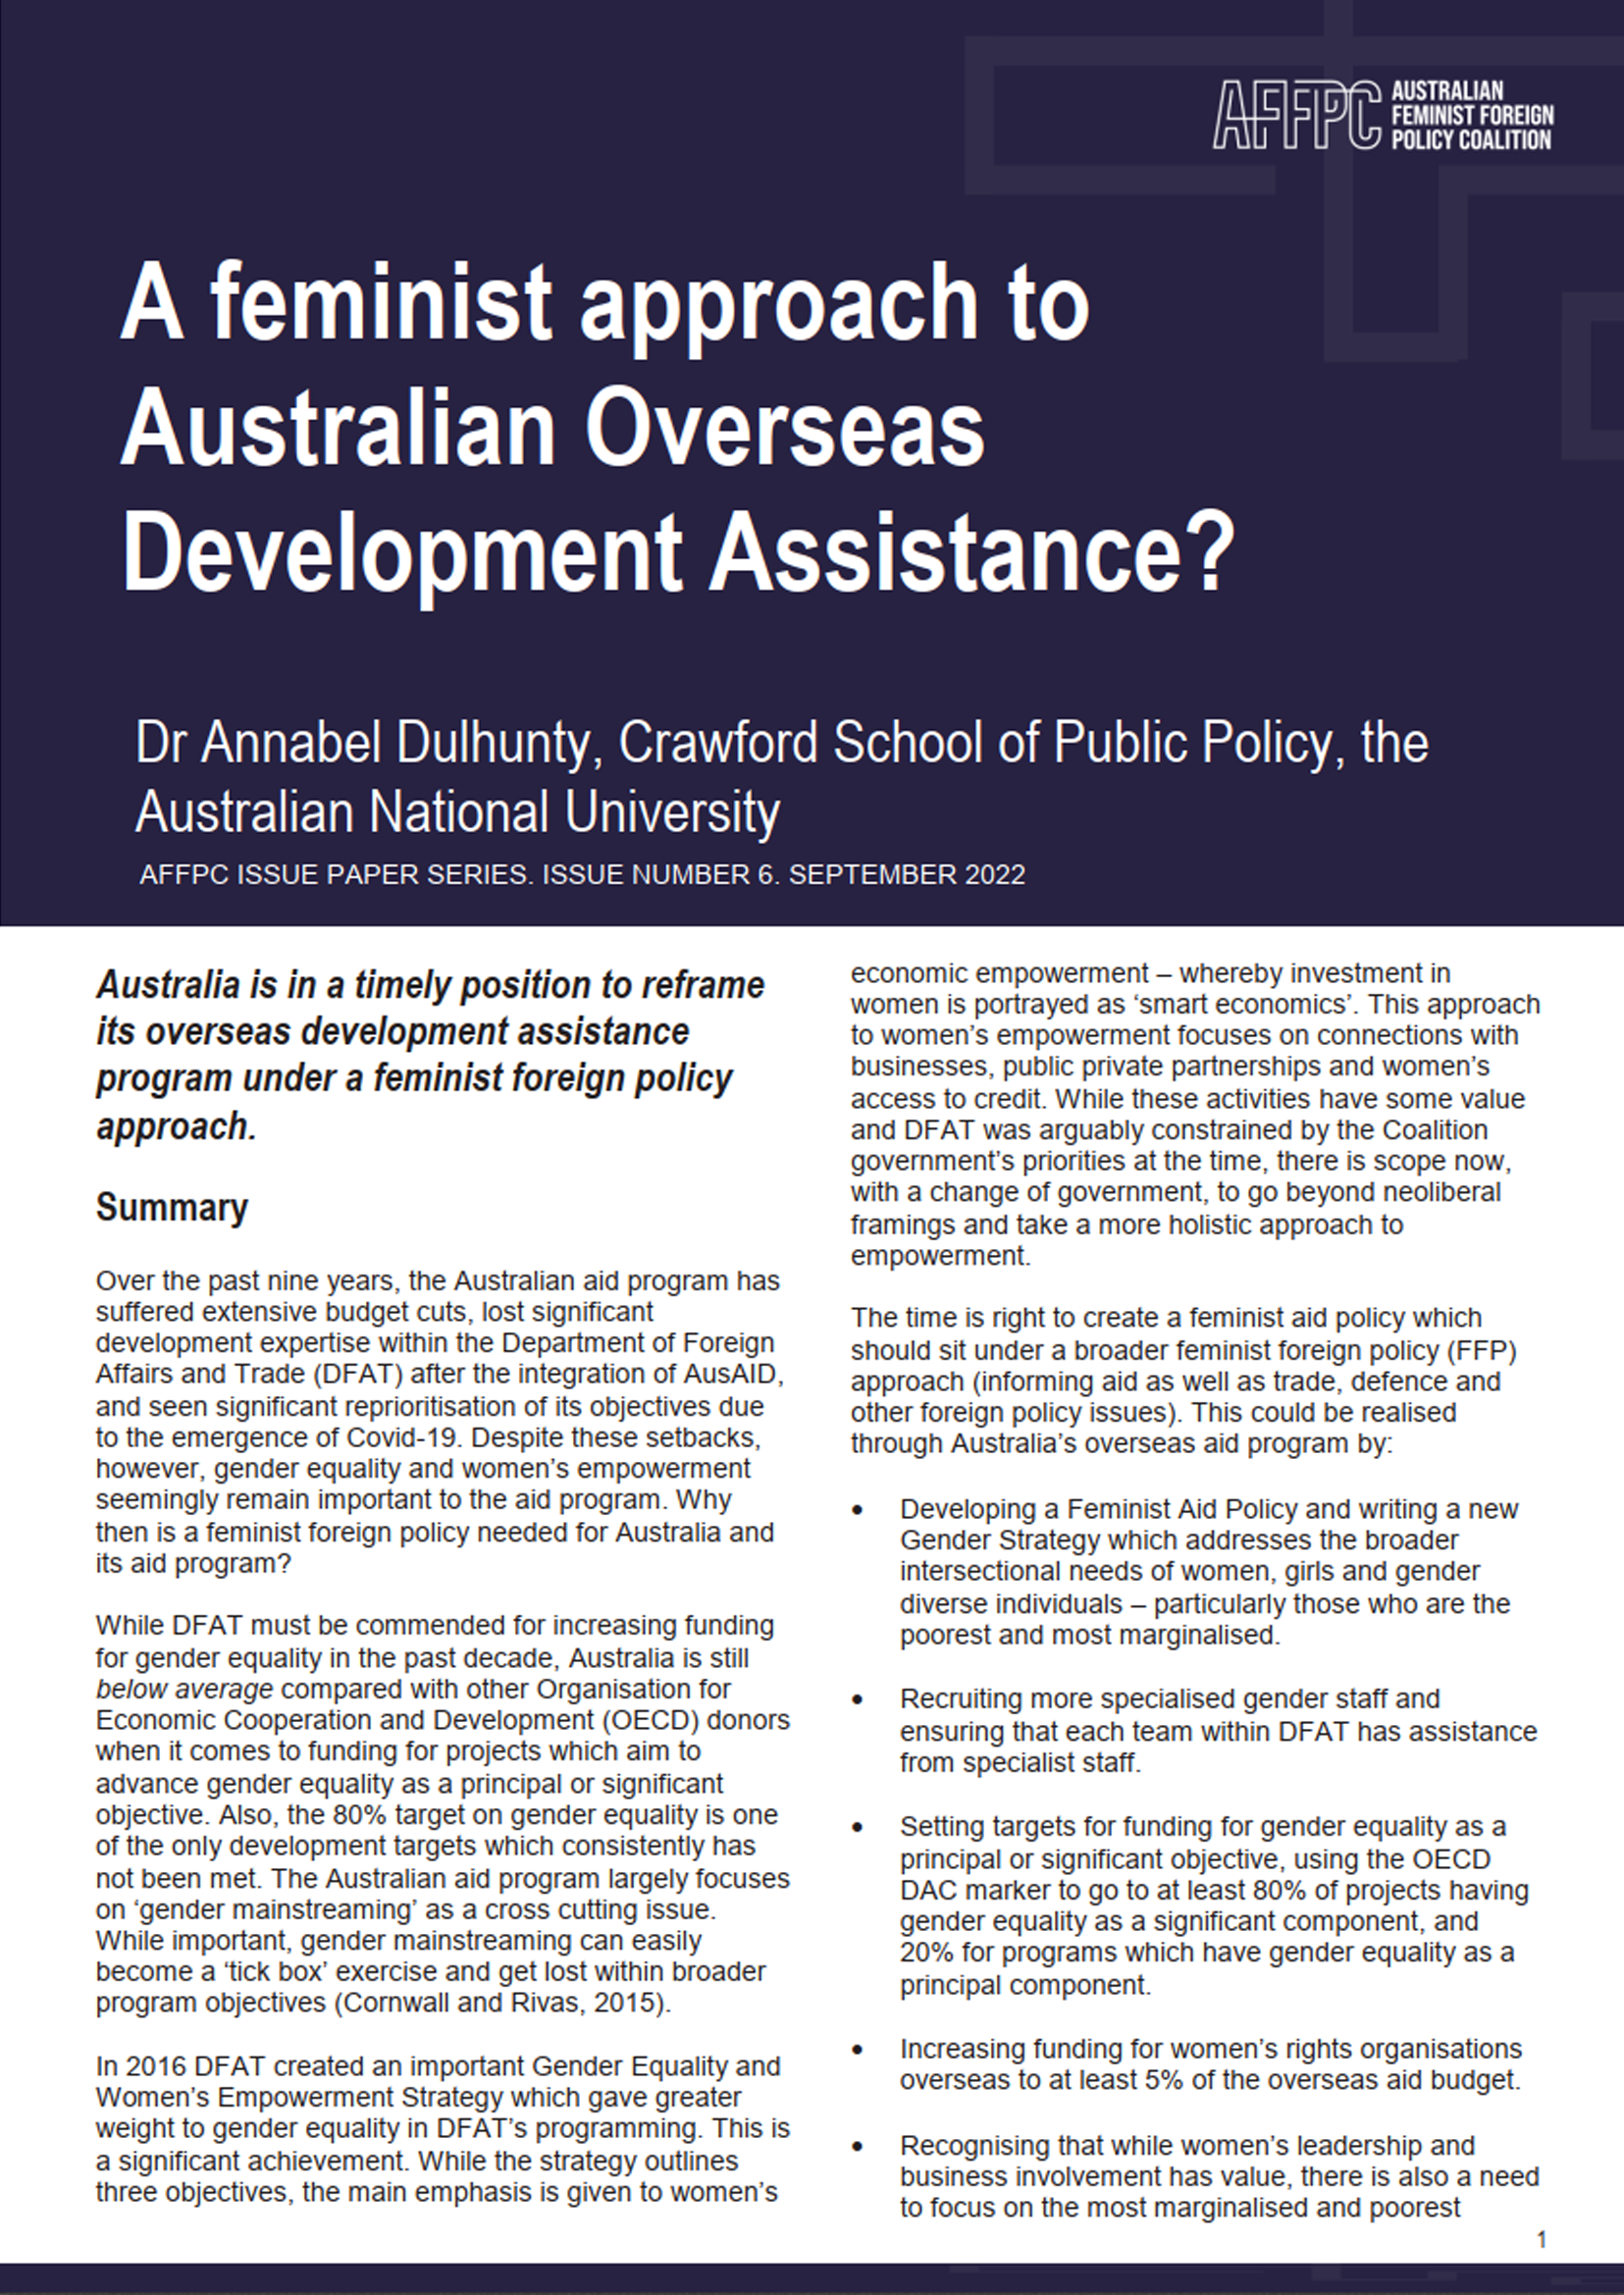 Page one of the AFFPC paper - Feminist Approach To Australian Overseas Development Assistance?